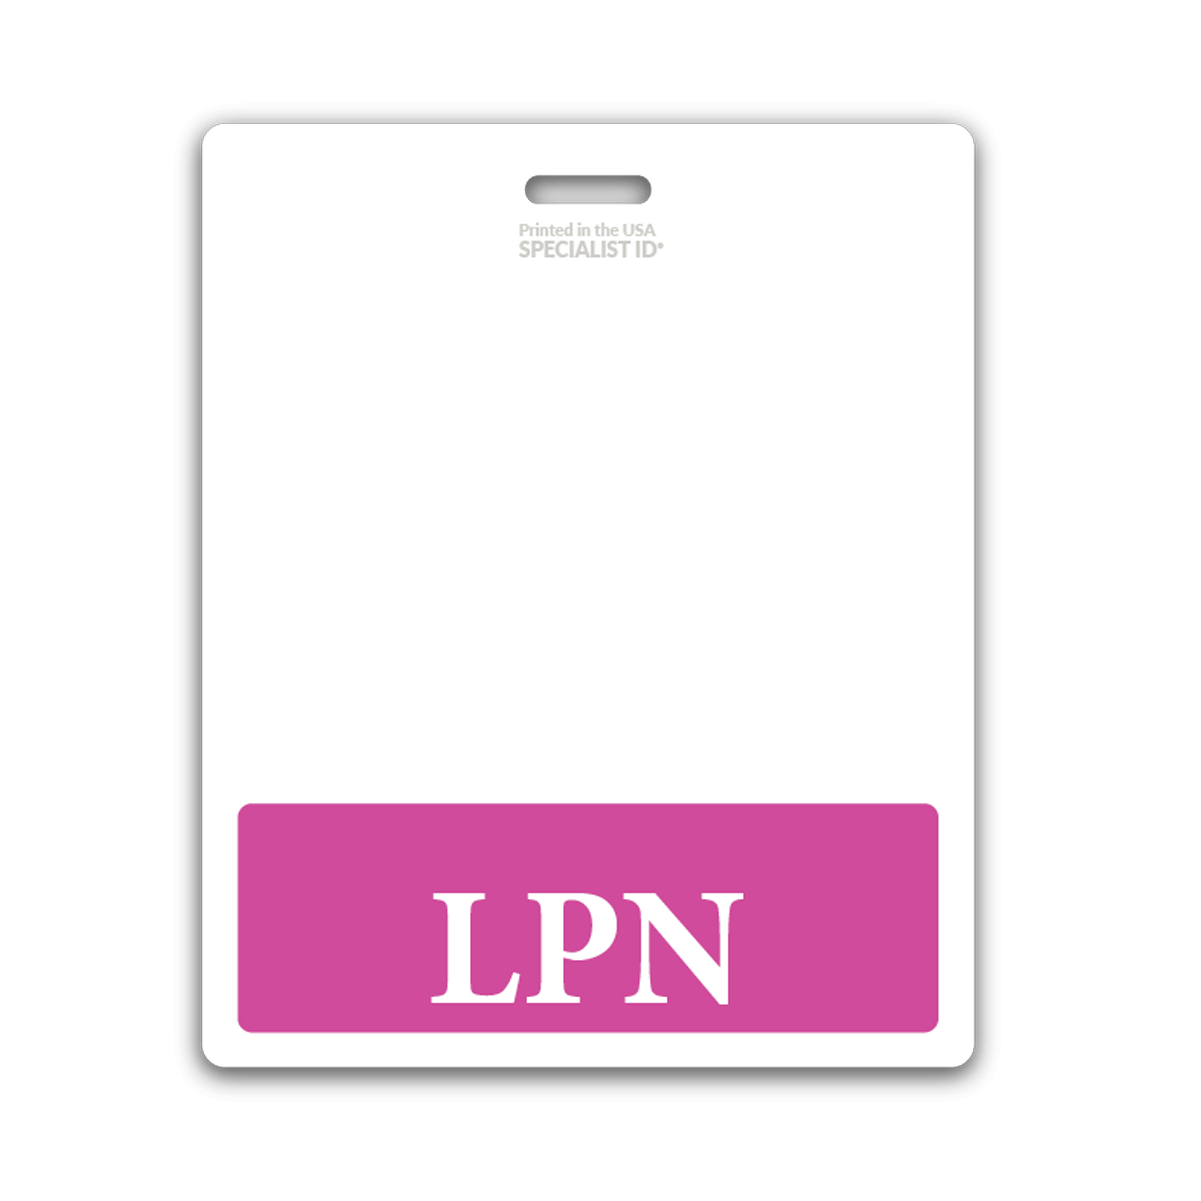 Extra Large and Long LPN Badge Buddy with Hot Pink Border - Double Side Print